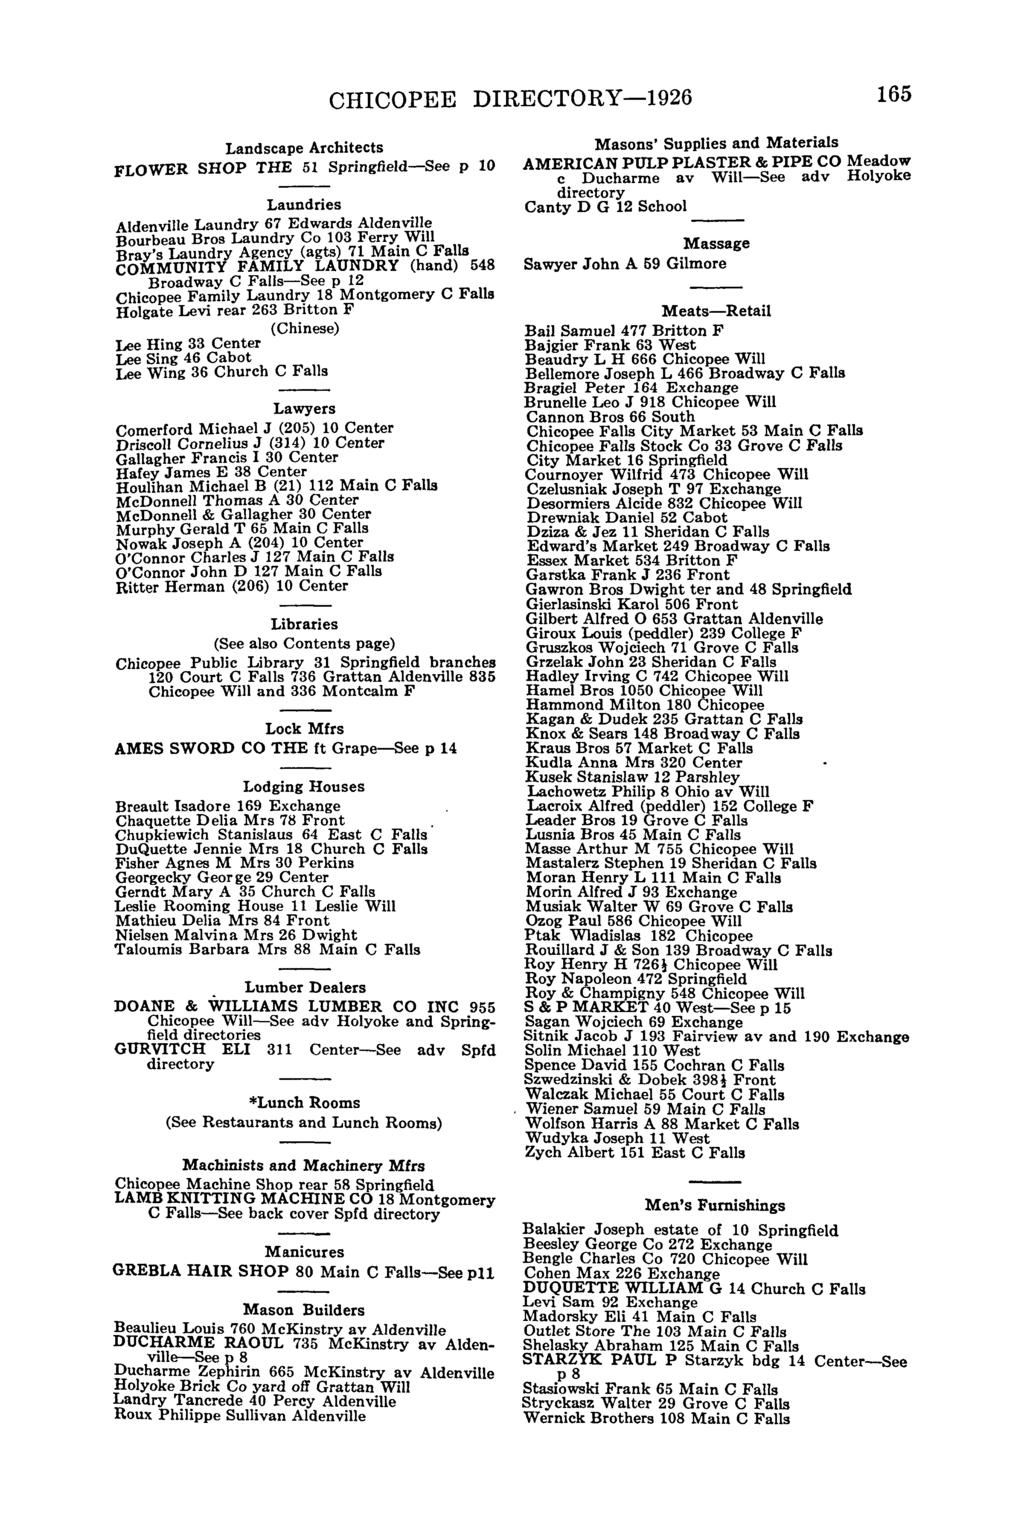 CHICOPEE DIRECTORY-1926 165 Landscape Architects FLOWER SHOP THE 51 Springfield-See p 10 Laundries Laundry 67 Edwards Aldenvil~e Bourbeau Bros Laundry Co 103 Ferry WIll Bray's Laundry Agency (agts)